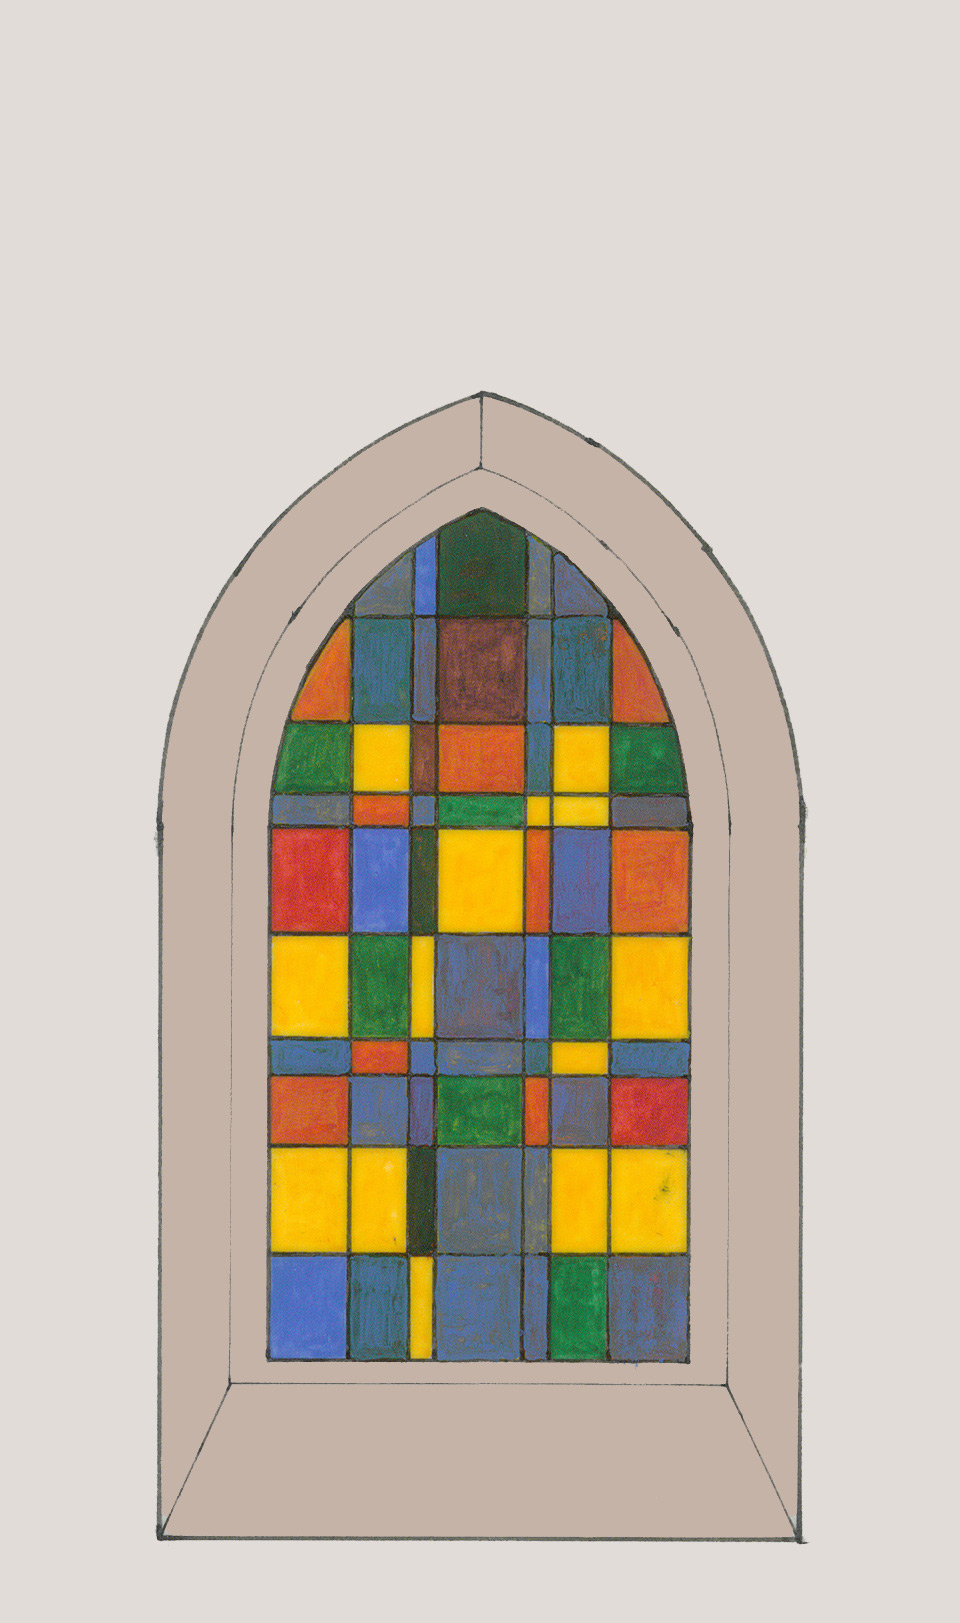 Stained glass and color projects as architectural elements.